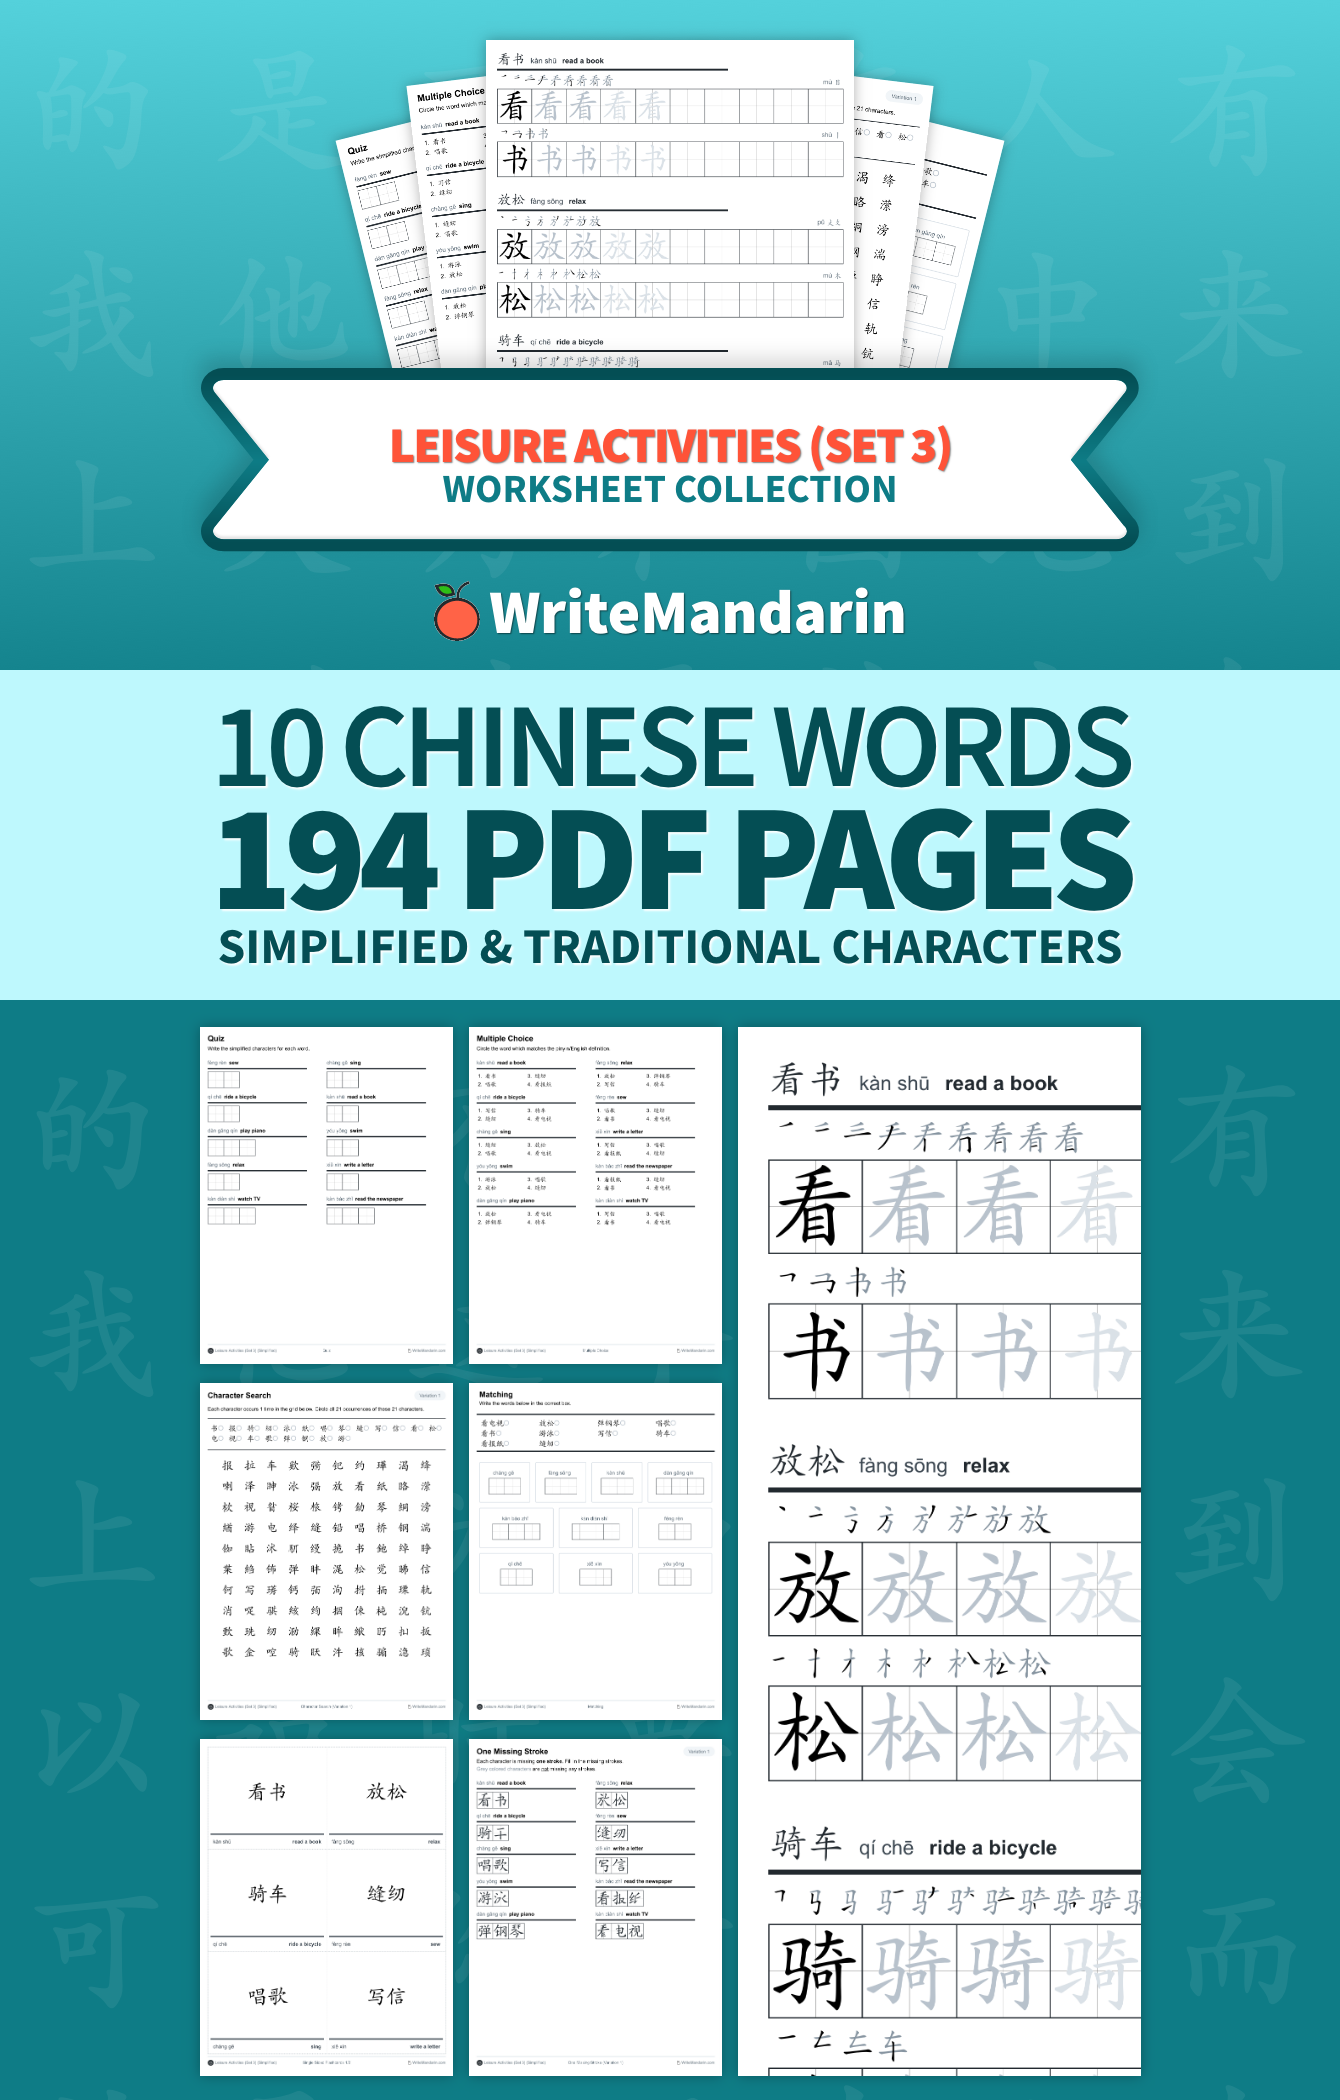 Preview image of Leisure Activities (Set 3) worksheet collection